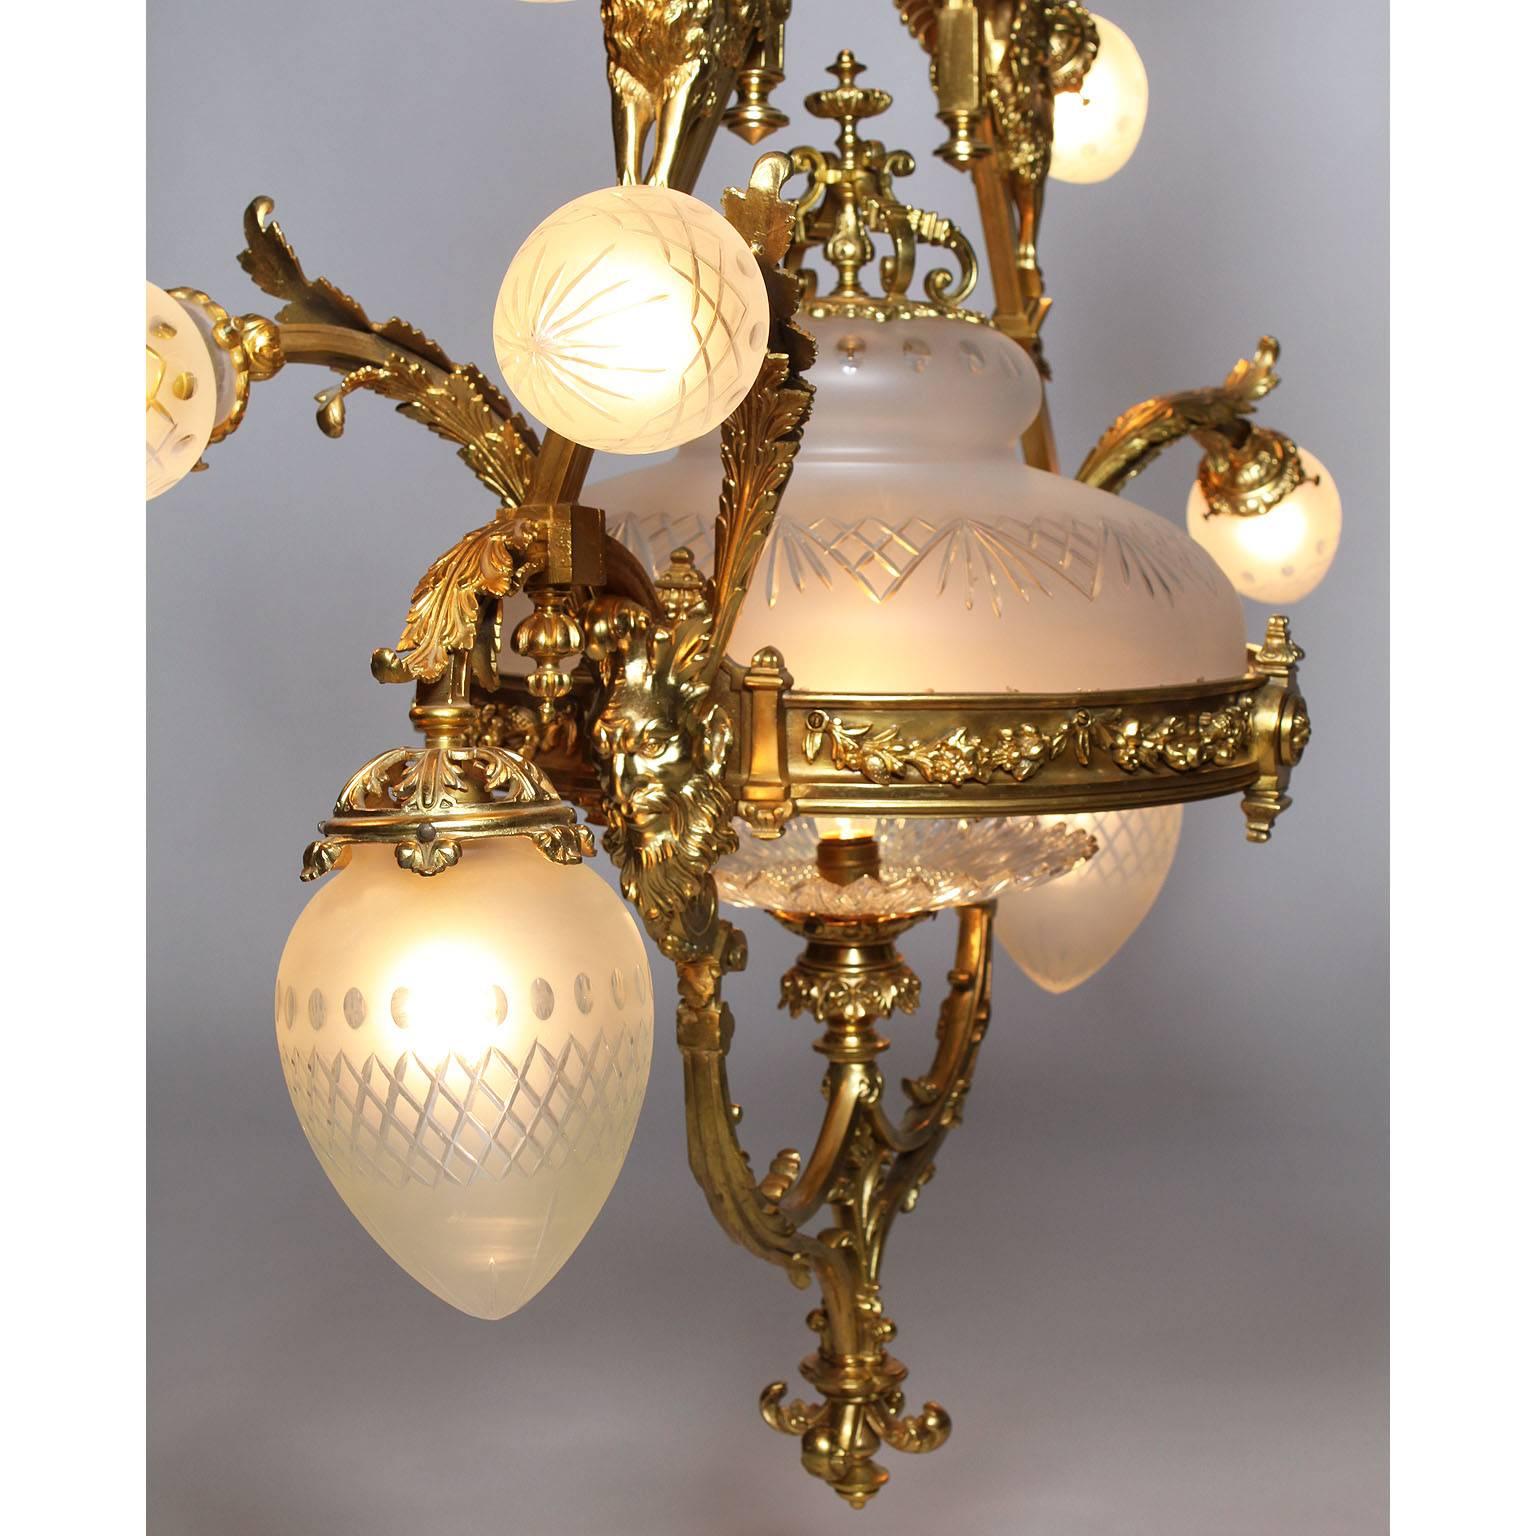 French Belle Epoque 19th-20th Century Neoclassical Style Gilt-Bronze Chandelier For Sale 1